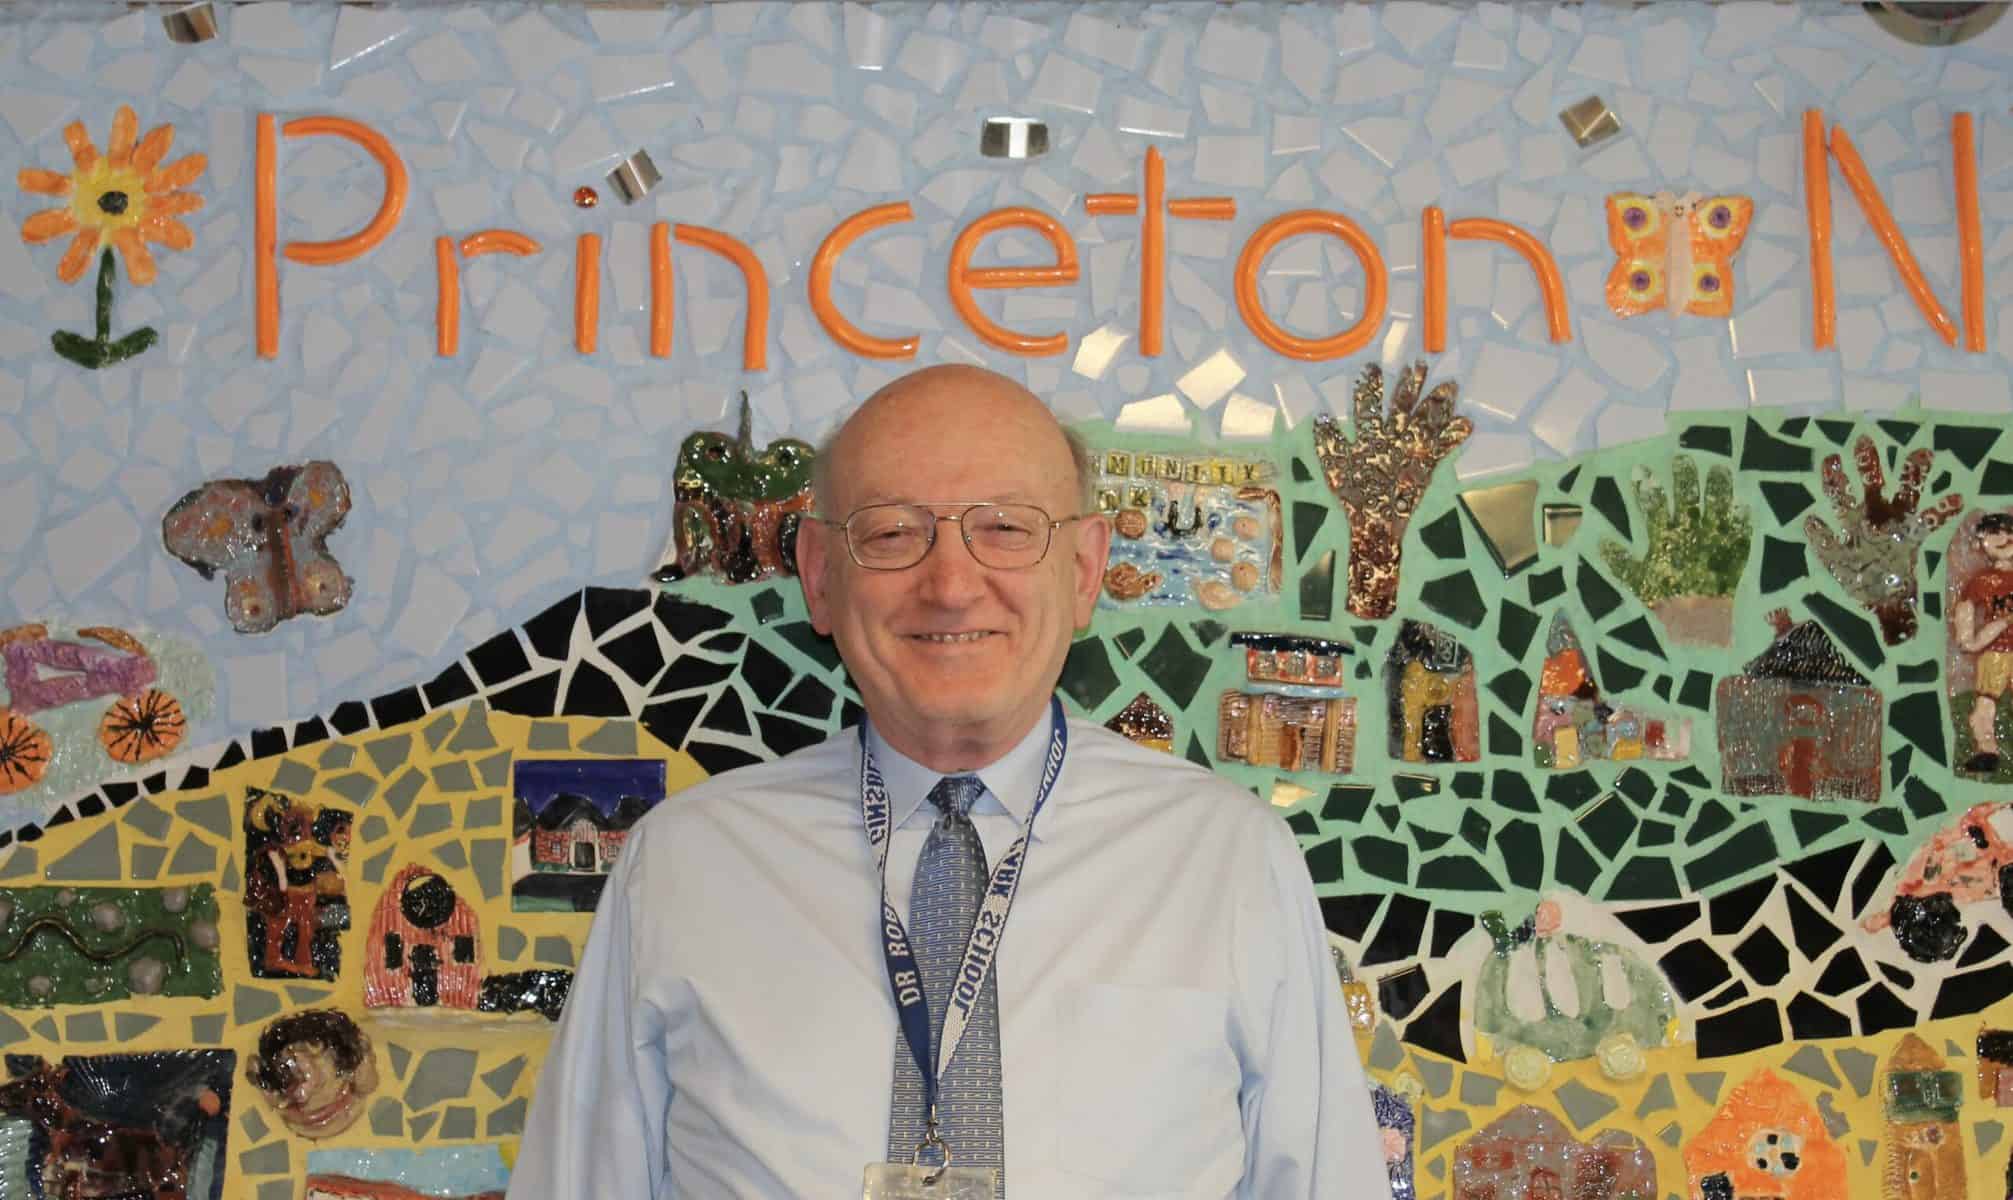 Educator Robert Ginsberg to be honored by the Princeton community on May 6